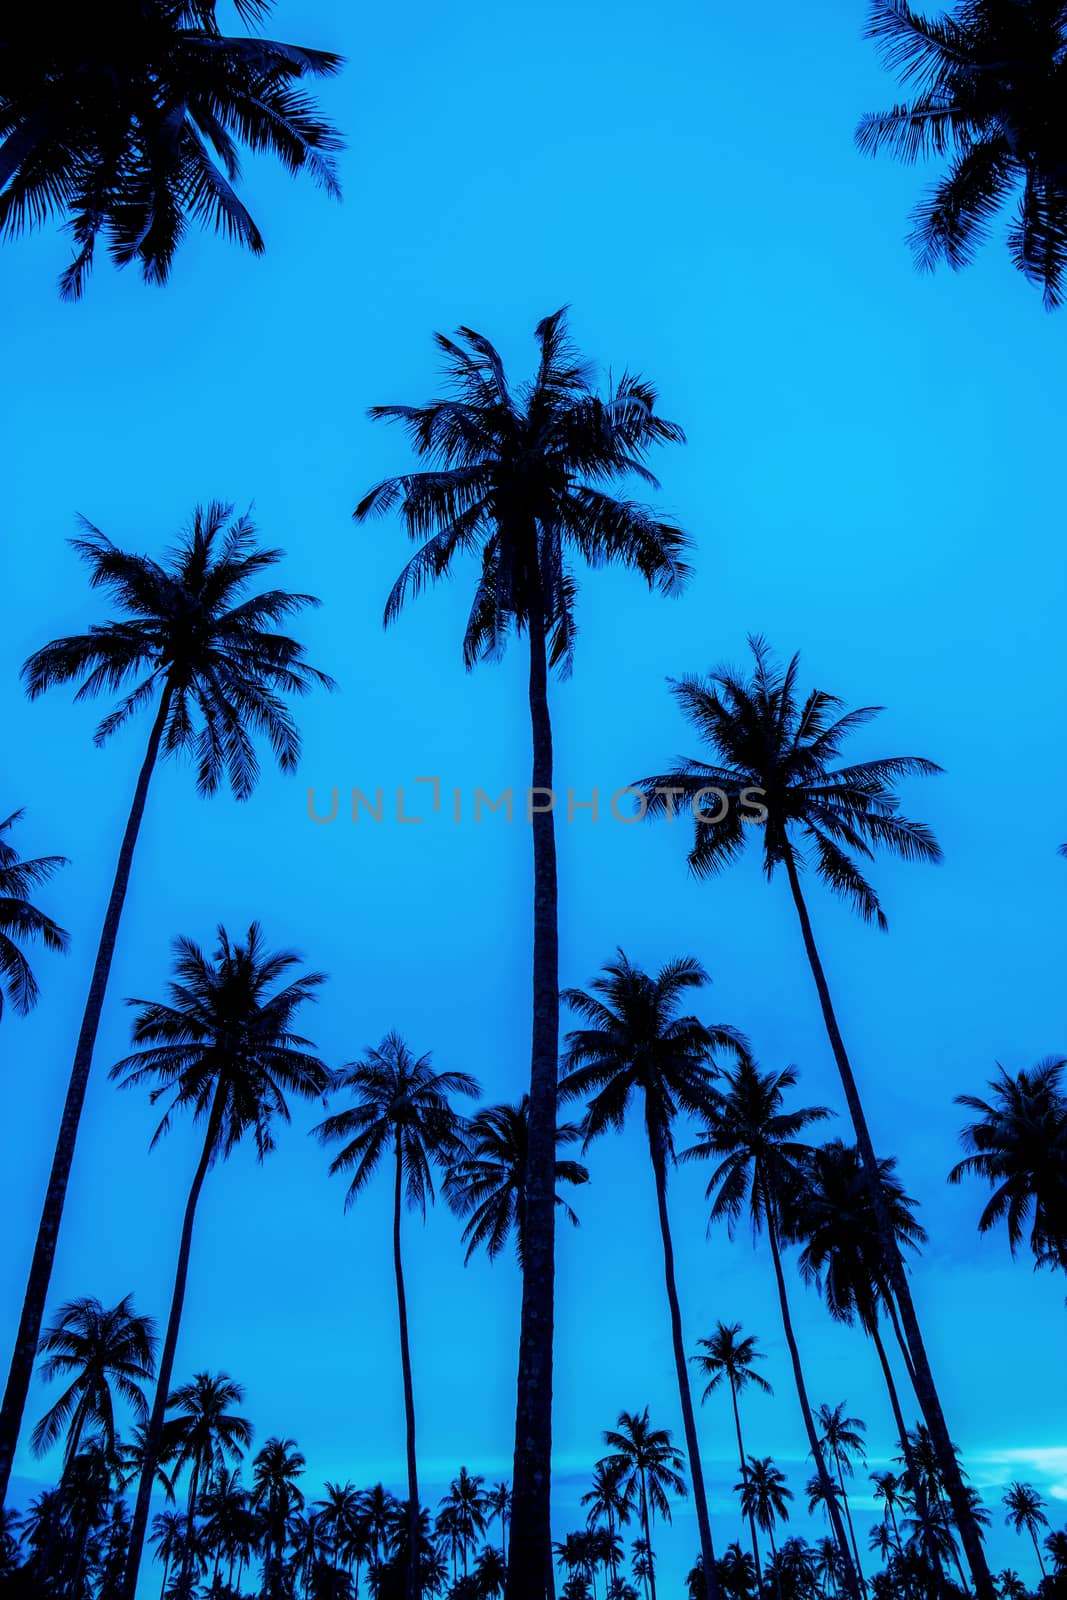 Palm tree in darkness with the blue sky background.